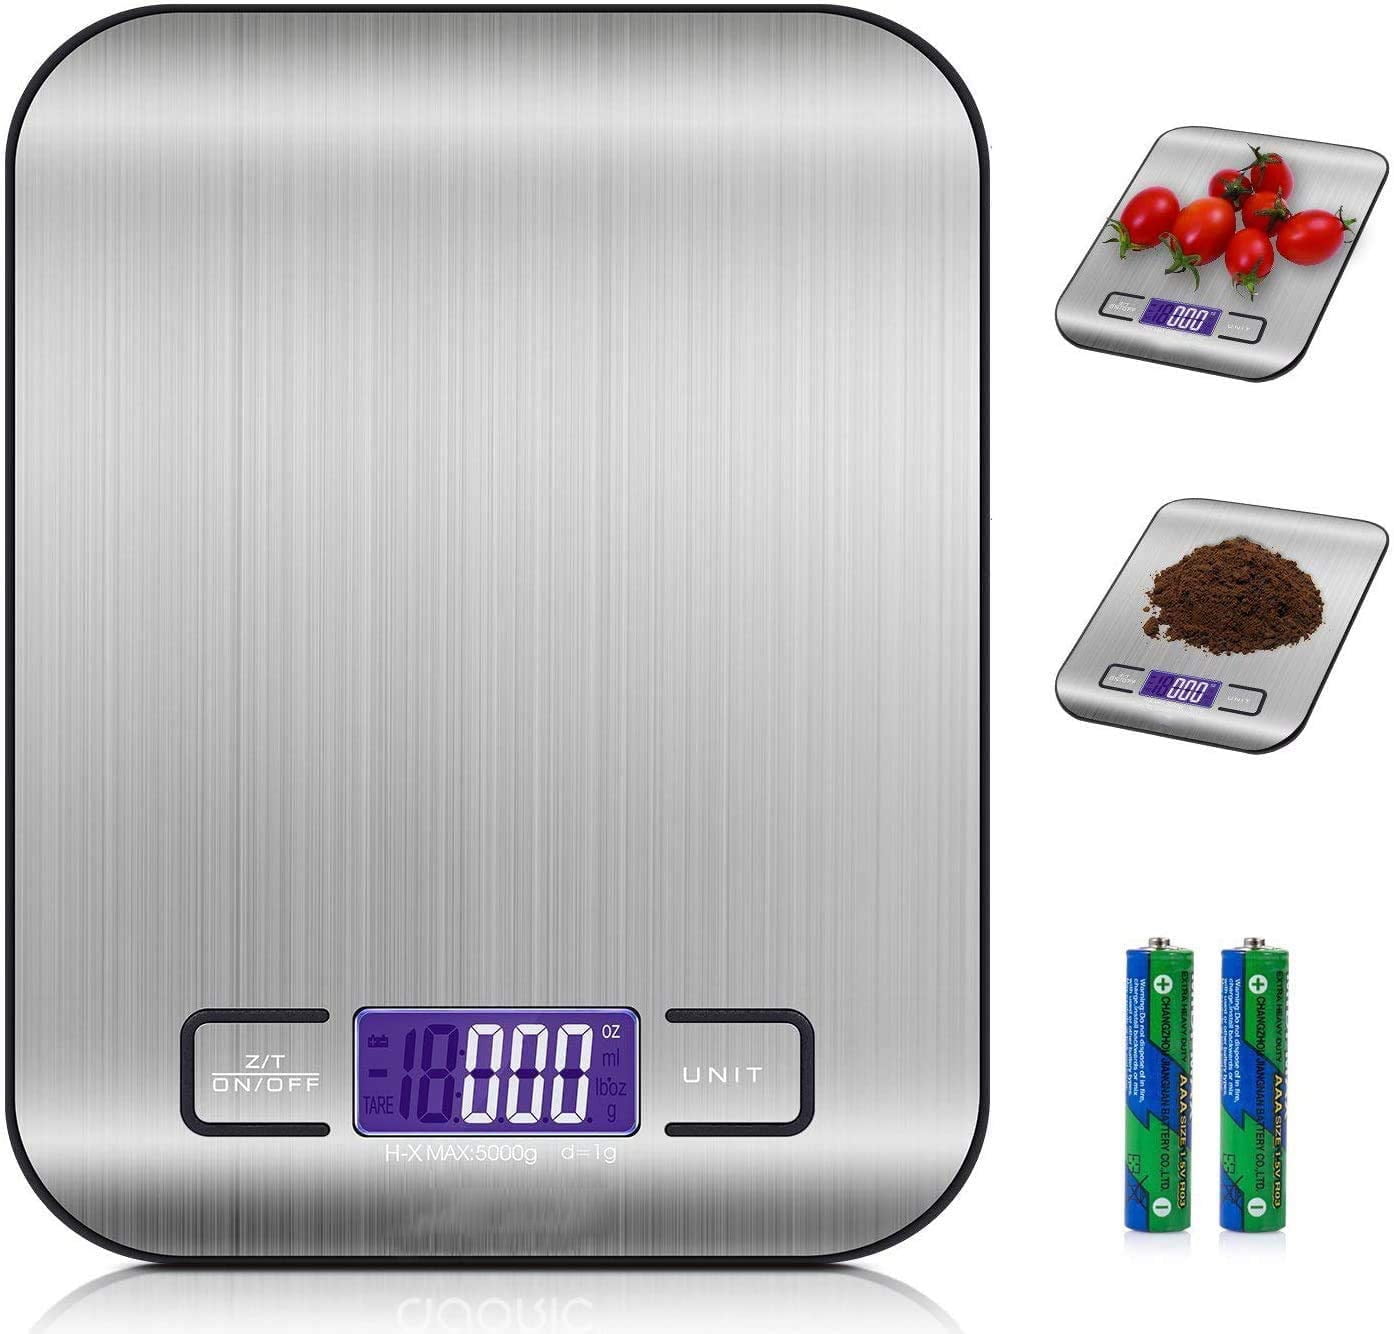 Kitchen Scale, 5kg/11lb Stainless Steel Digital Scale, Food Scale